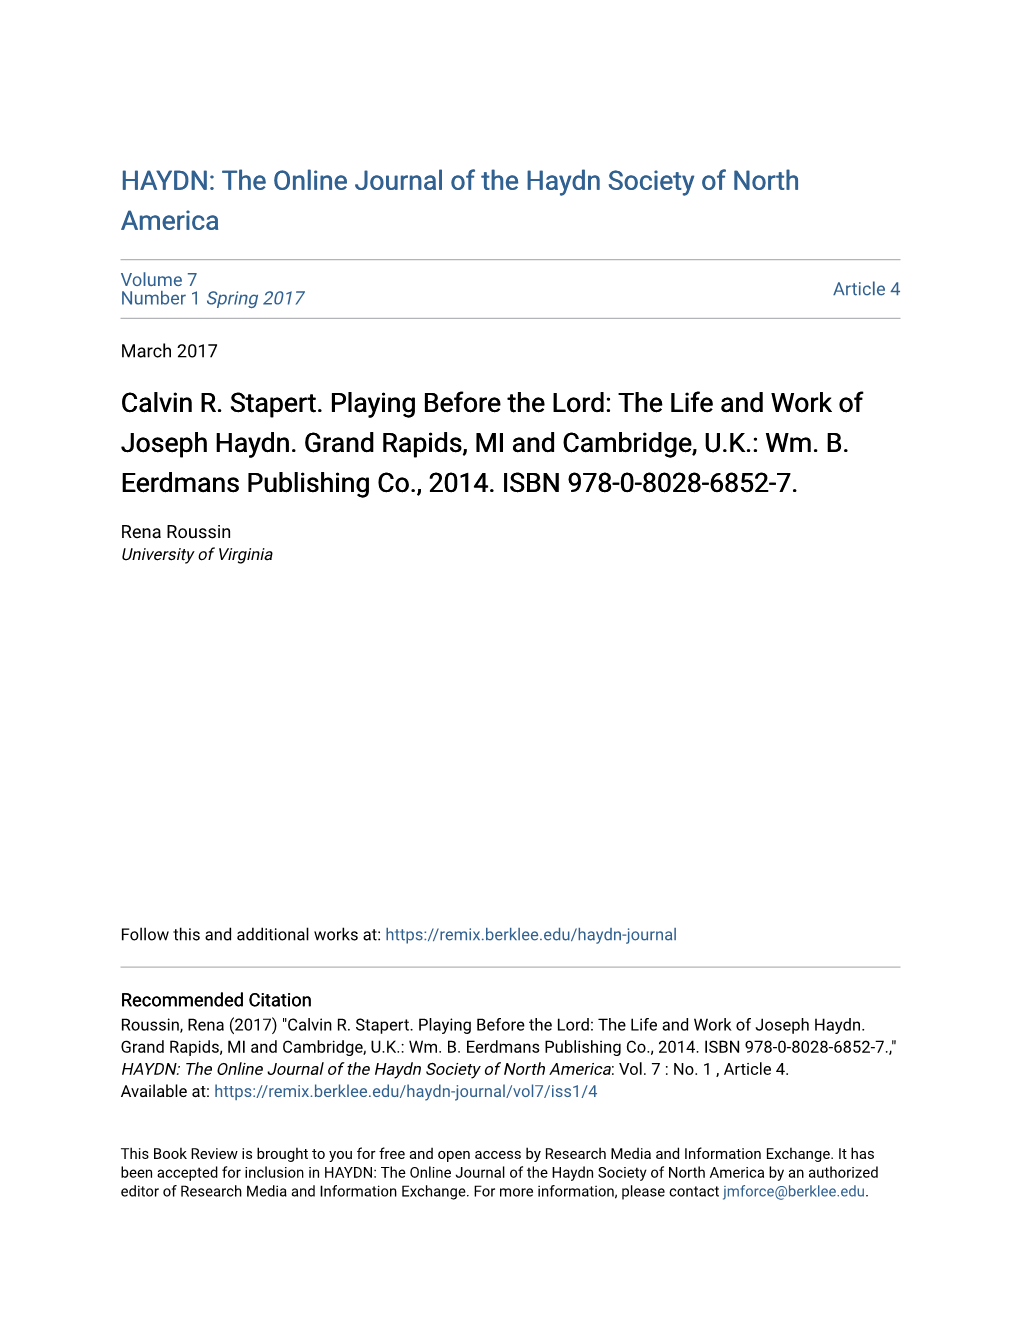 Calvin R. Stapert. Playing Before the Lord: the Life and Work of Joseph Haydn